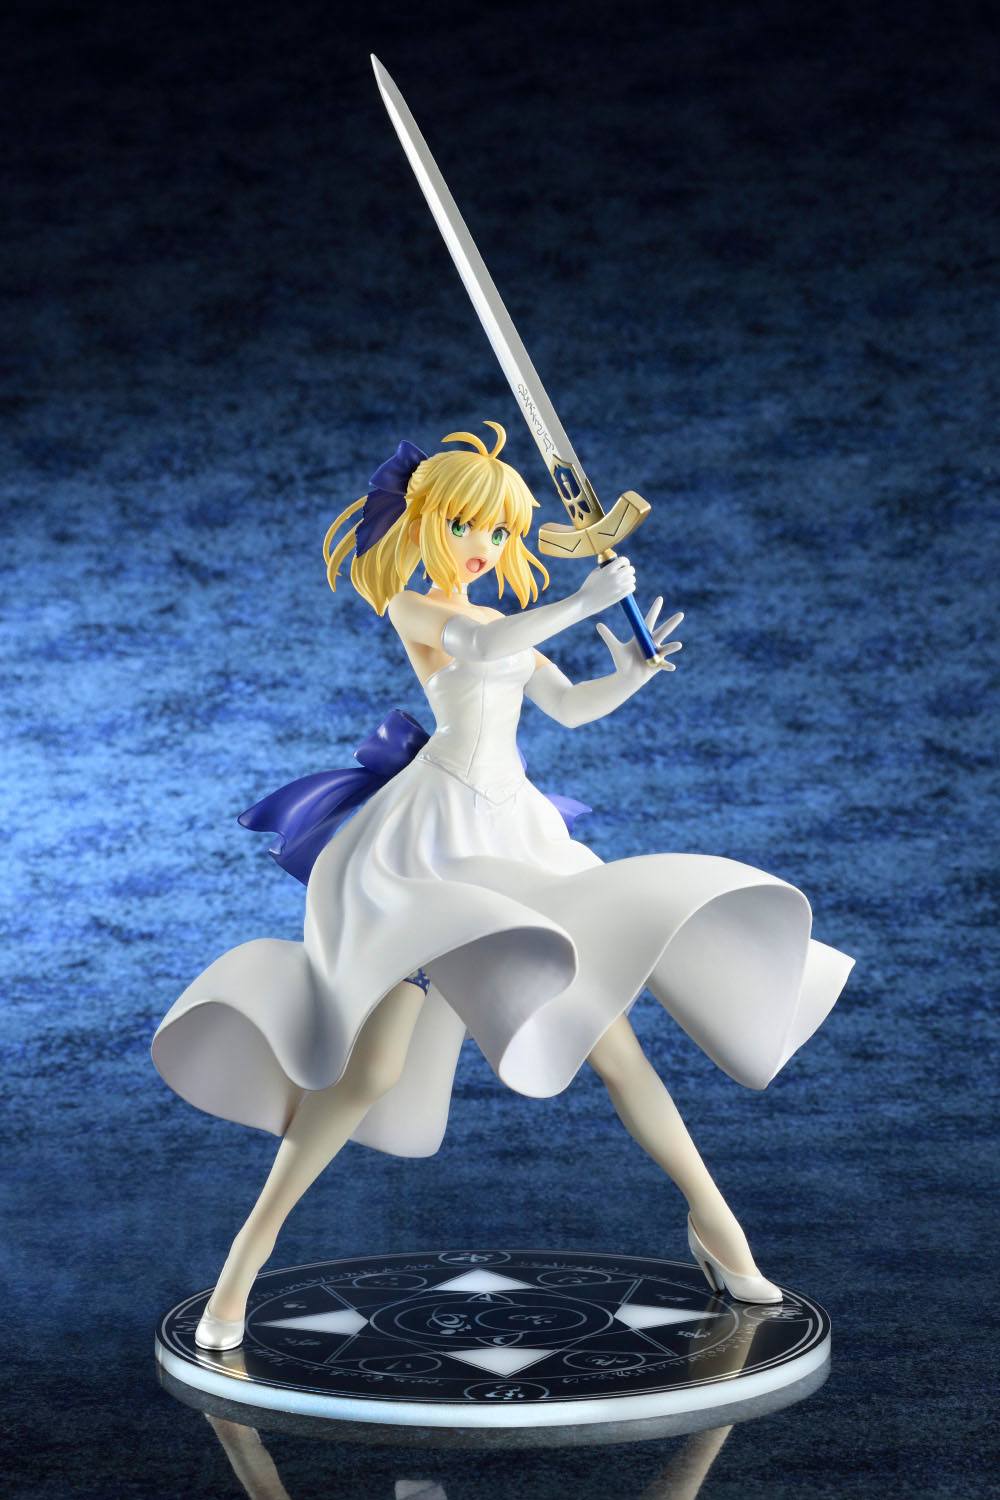 Saber - White Dress Renewal Version / Fate/Stay Night Unlimited Blade Works